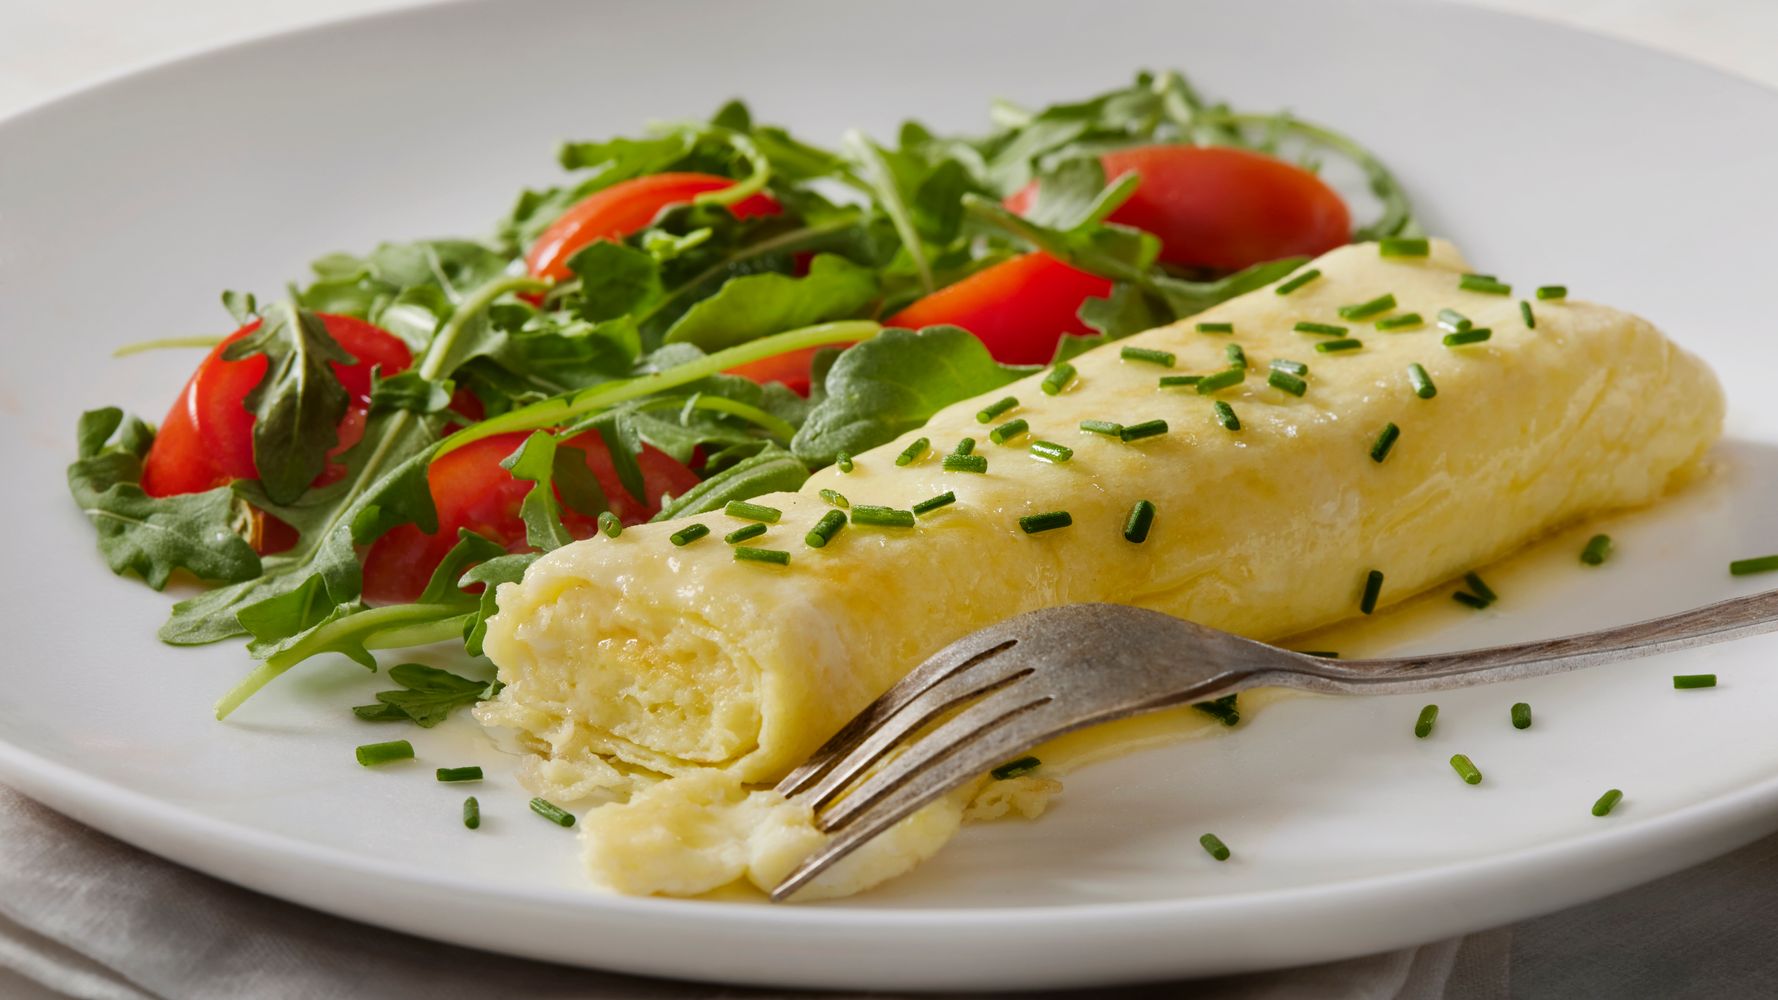 How To Make The Perfect French Omelet, According To Experts